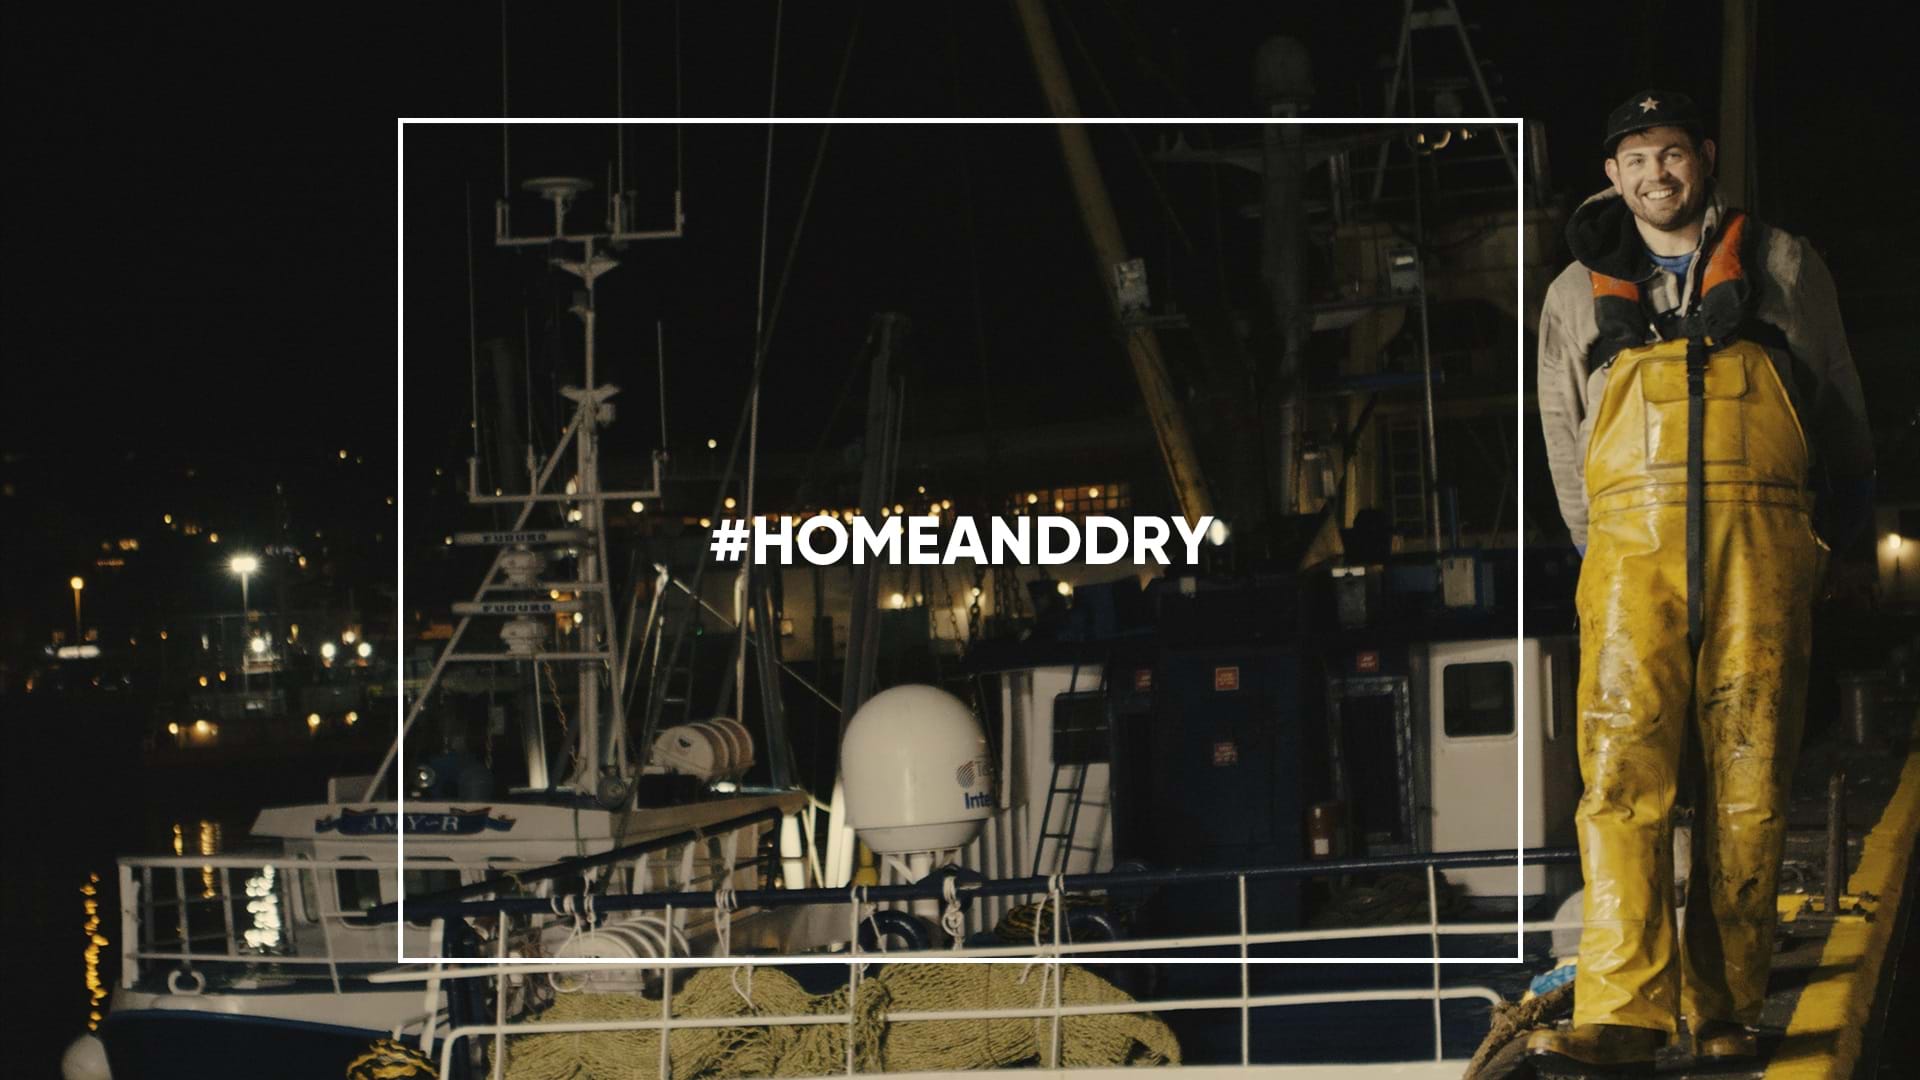 Image of fishermen on quay from Home and Dry campaign